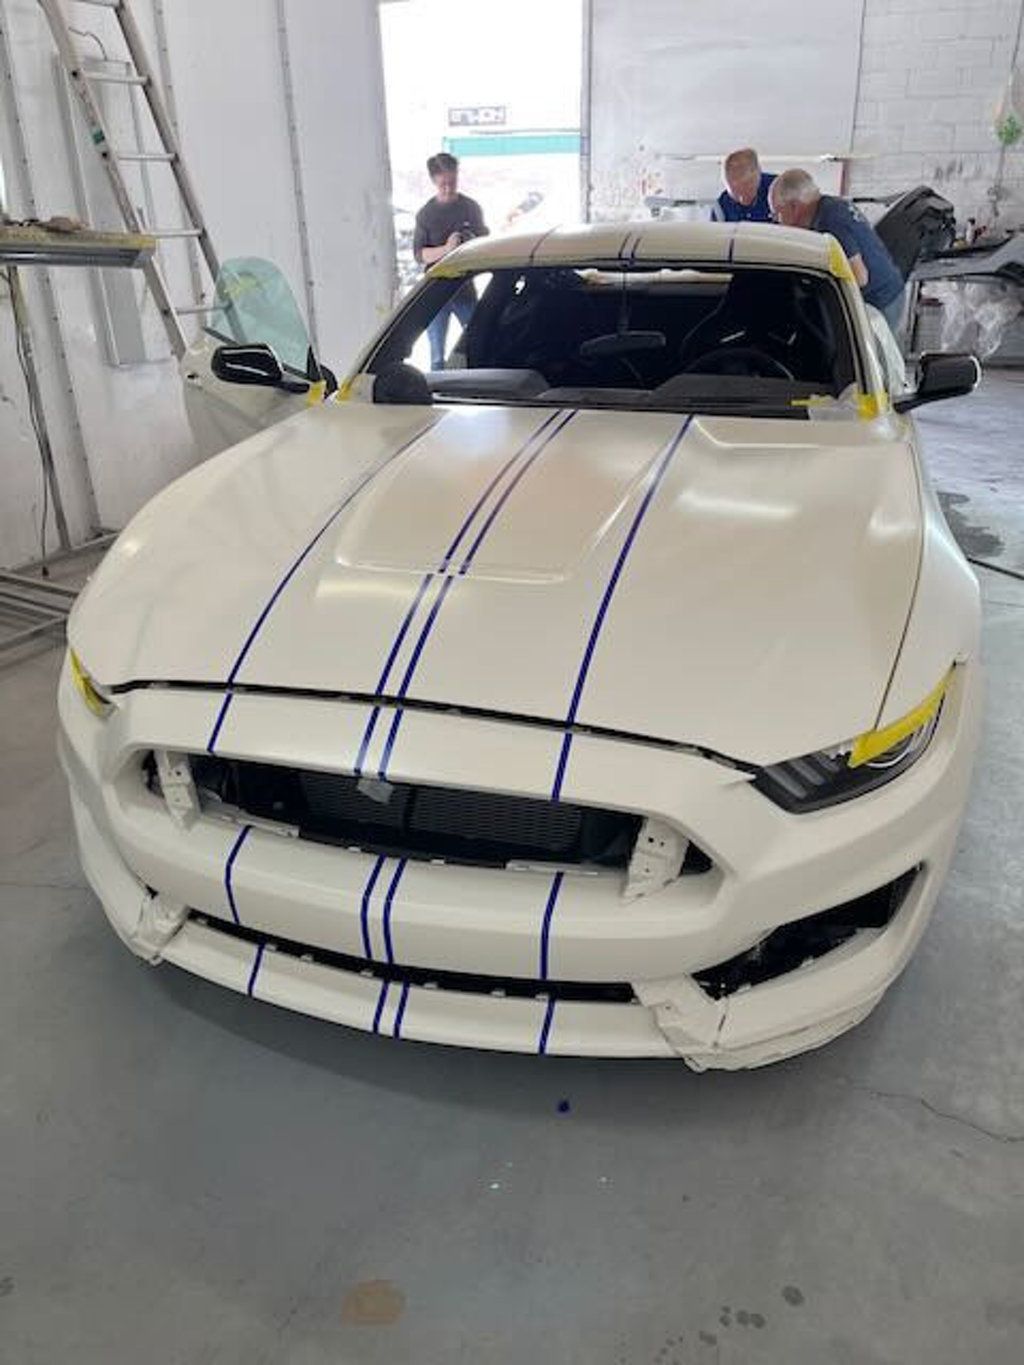 2020 Ford Mustang GT350R HE 1 of 3 With Painted Stripes Redesigned By Peter Brock - 22305899 - 96